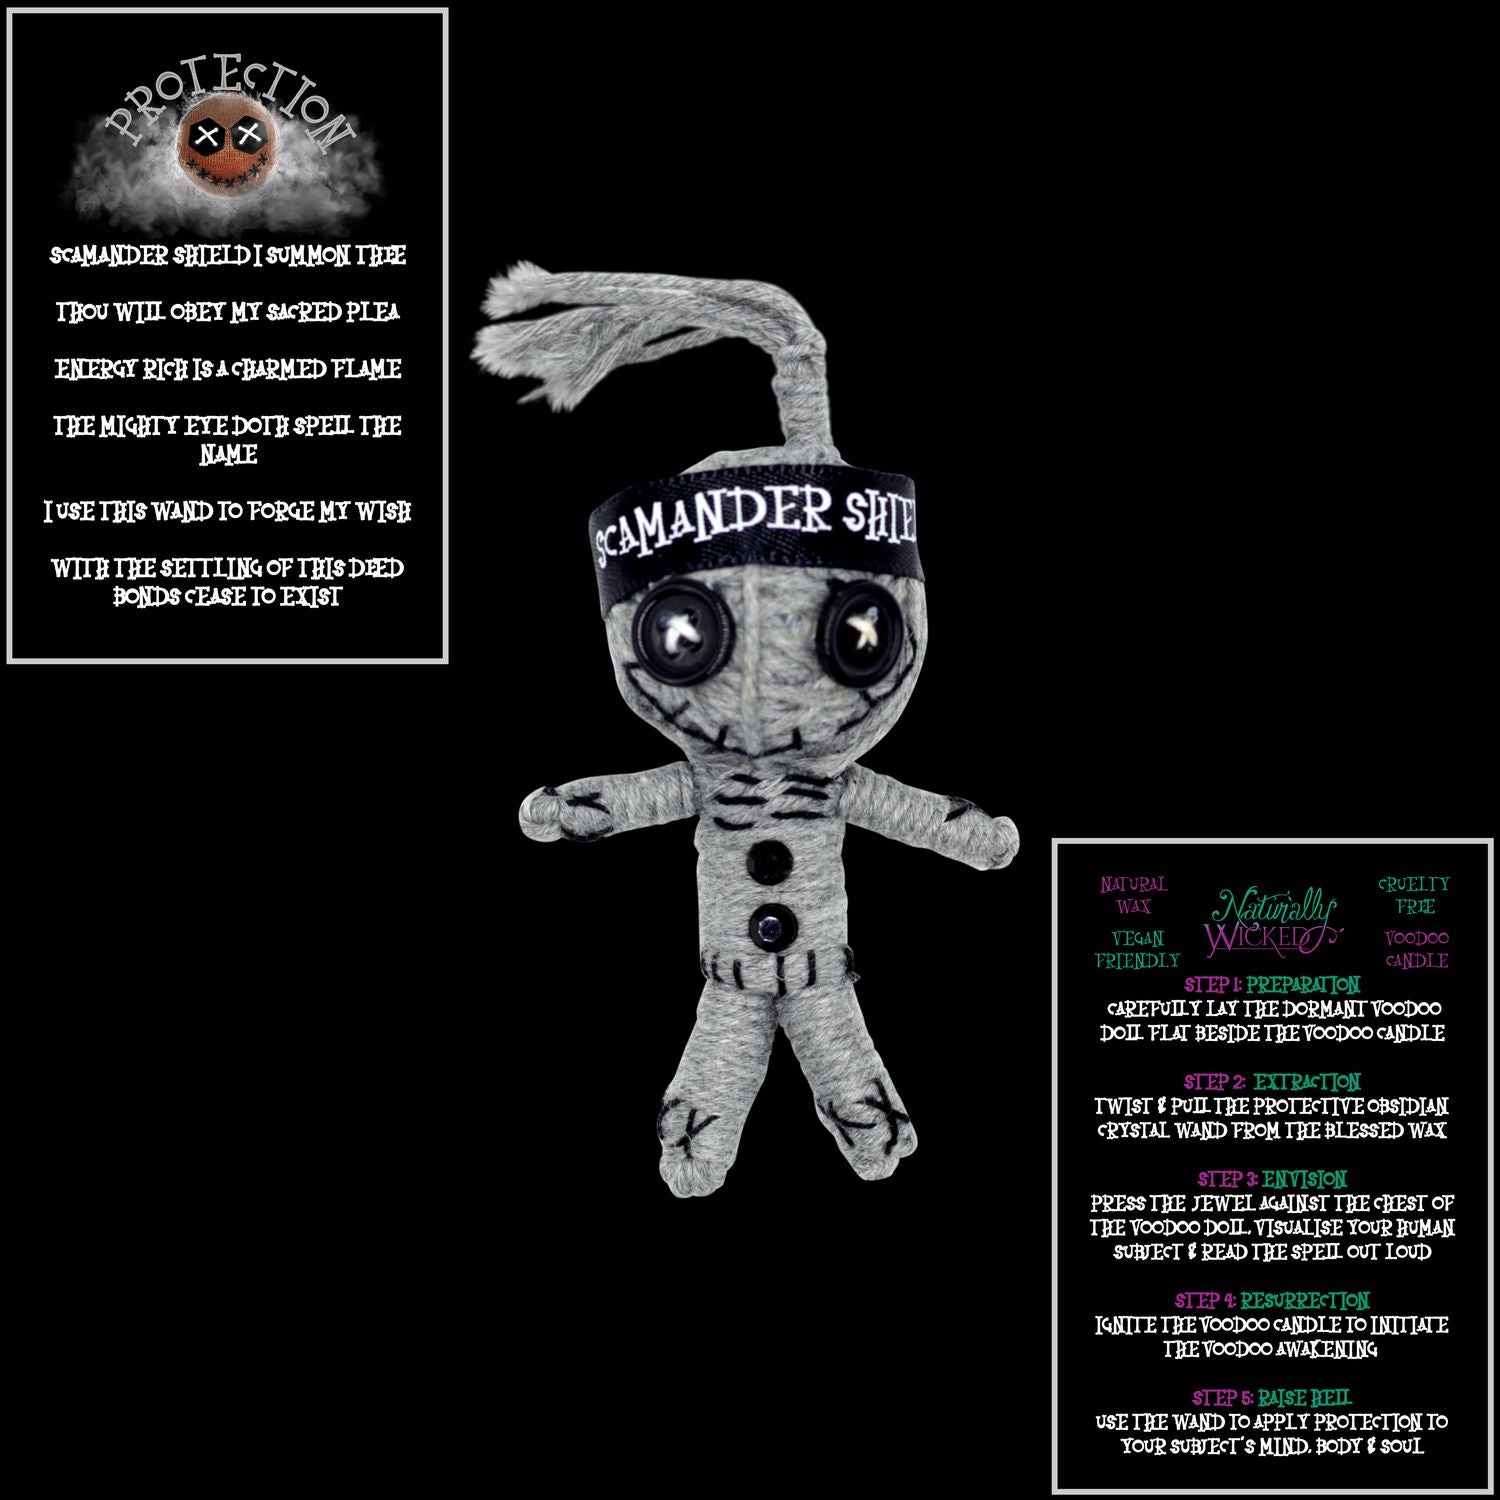 Naturally Wicked Black Voodoo Doll Scamander Shield Featured With Protection Spell Cards. The Perfect Gift Of Protection.